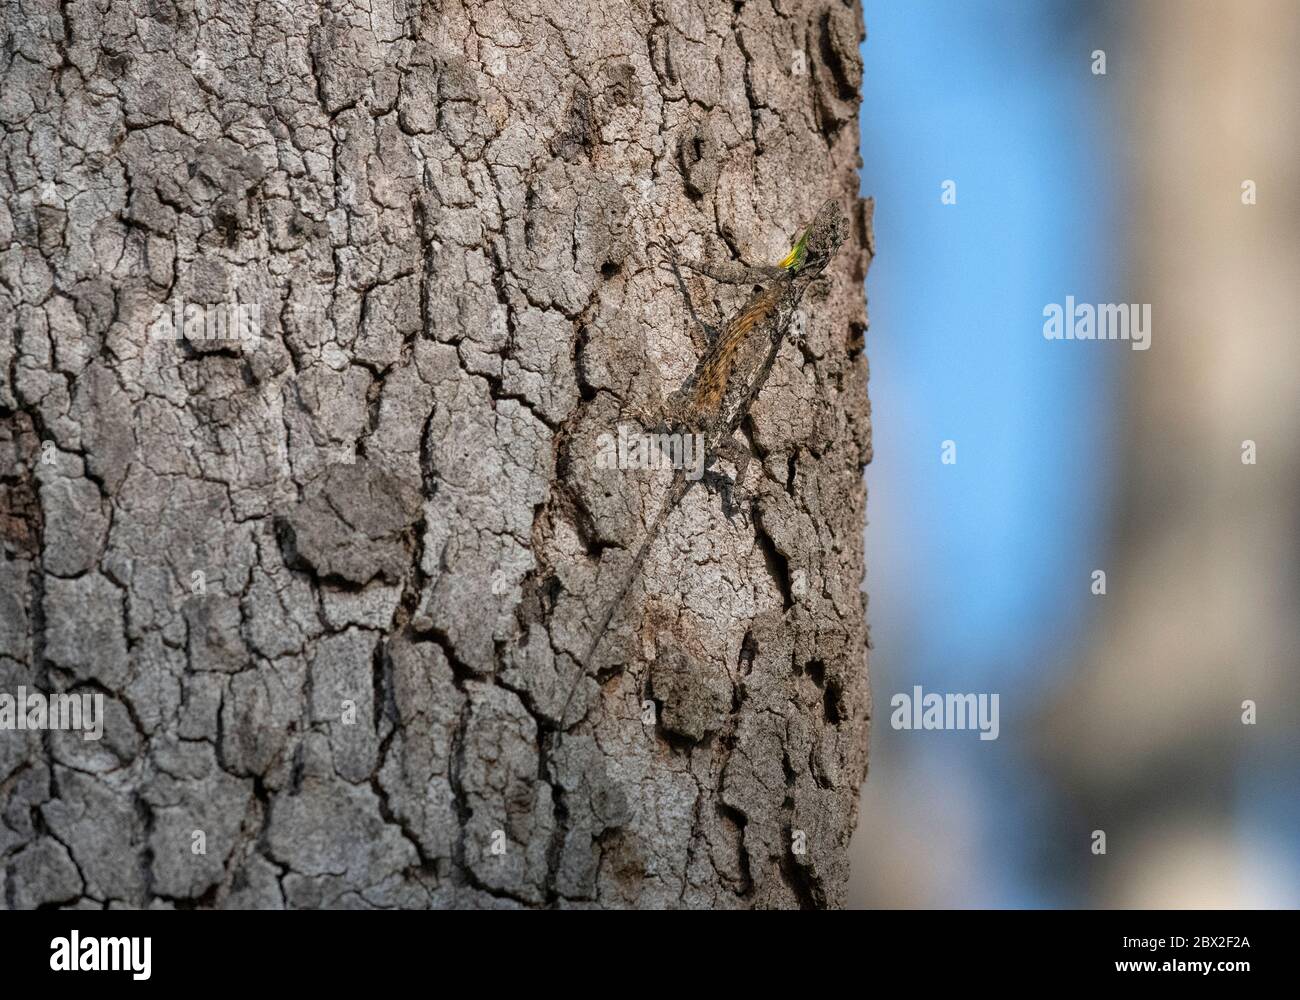 Draco, Gliding lizard or Flying lizard blends in by chilling on a tree trunk. Animal Camouflage. Stock Photo